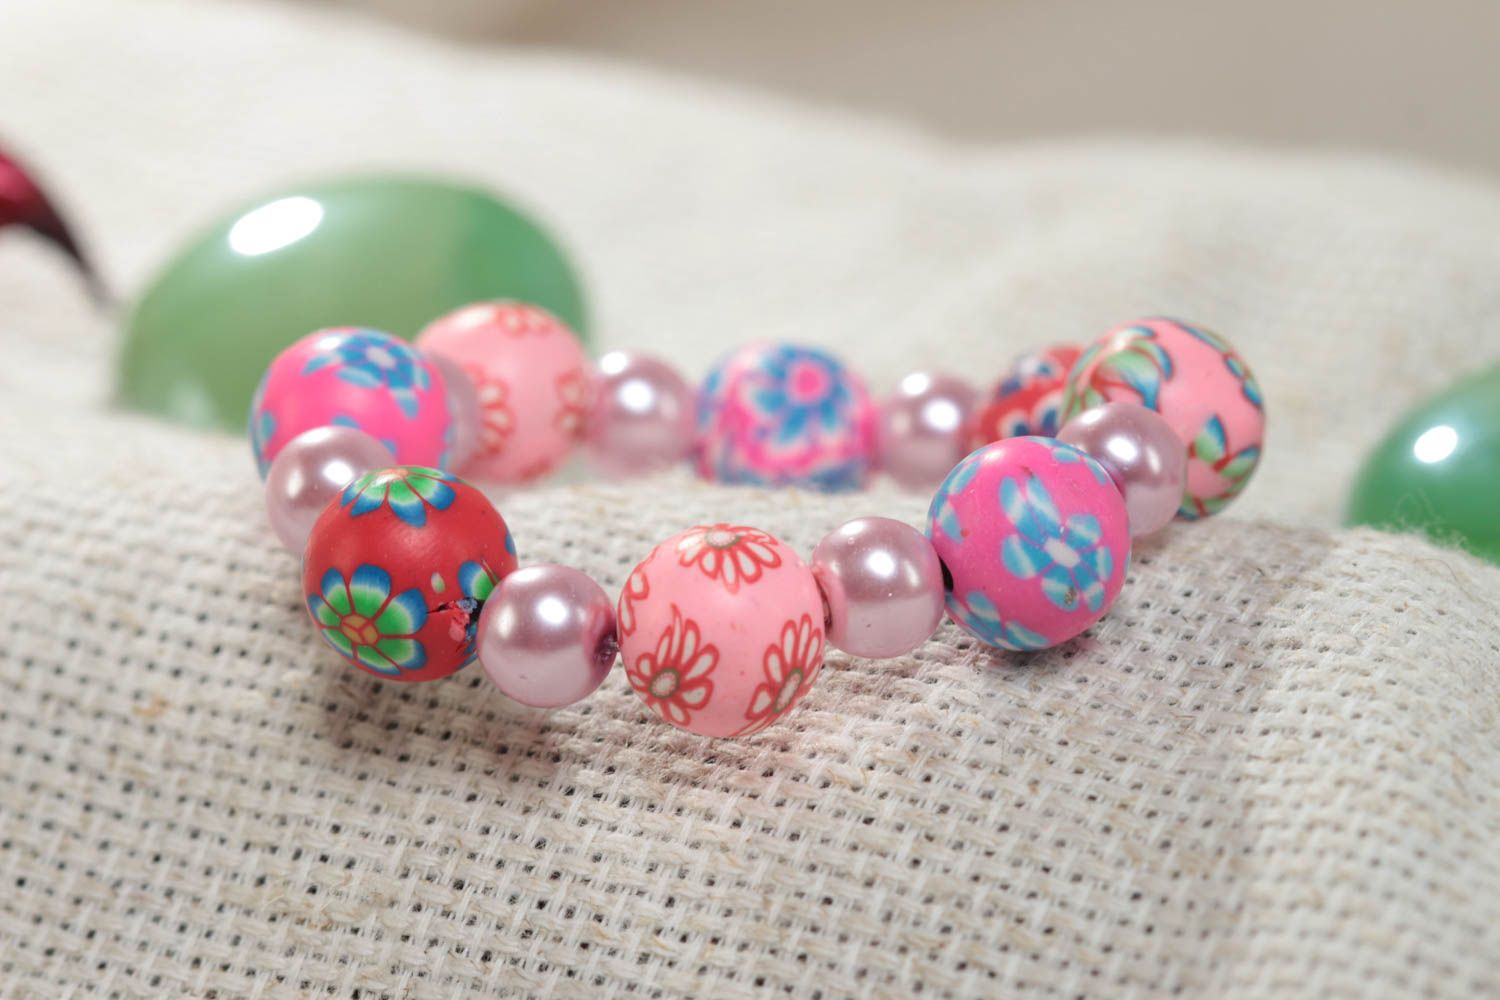 Buy The Red Polymer Clay and Silver Beaded Bracelet | JaeBee Jewelry 6 - 7